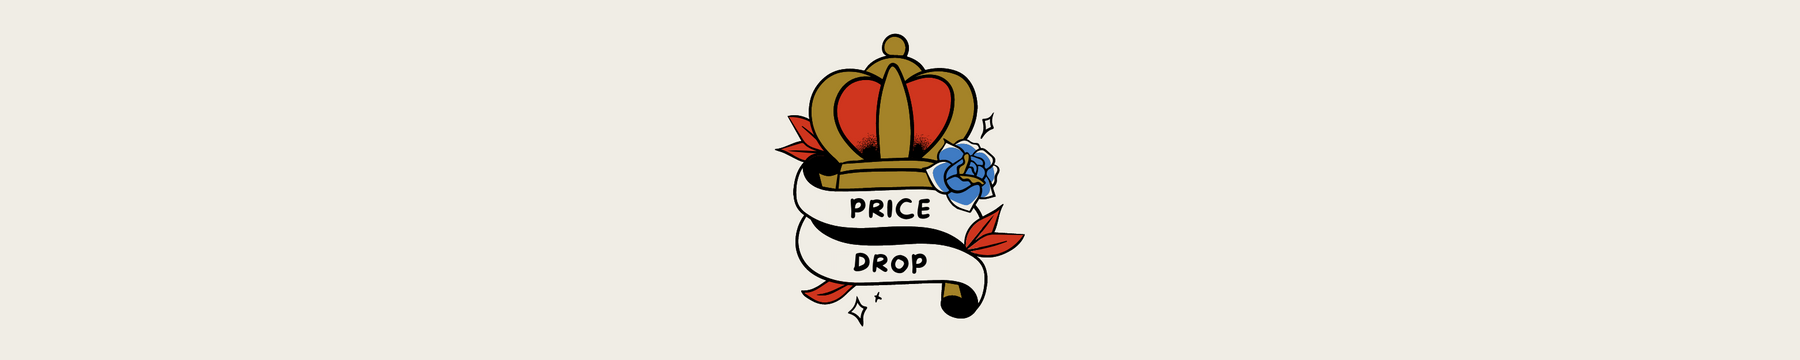 Price Drops Fit for a King!